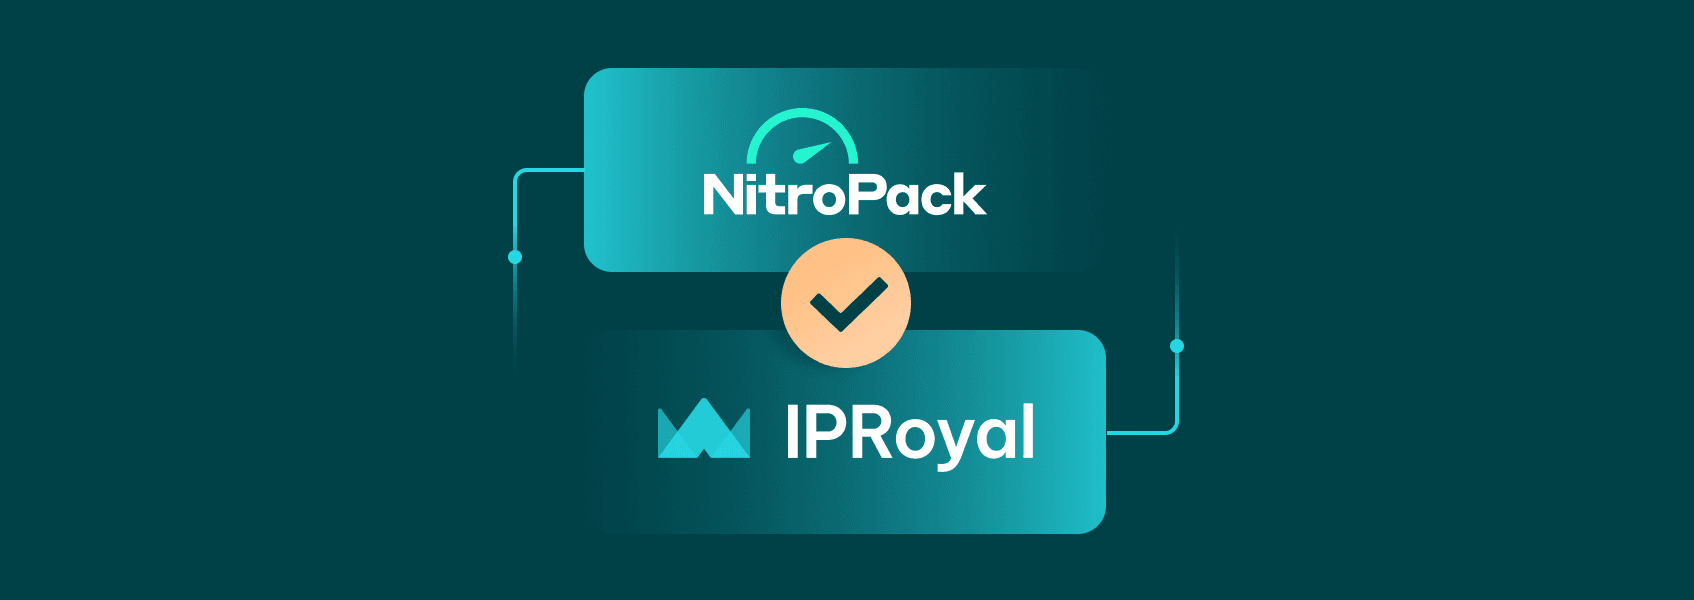 How NitroPack Uses IPRoyal to Provide Additional Value to Clients and Increase Performance